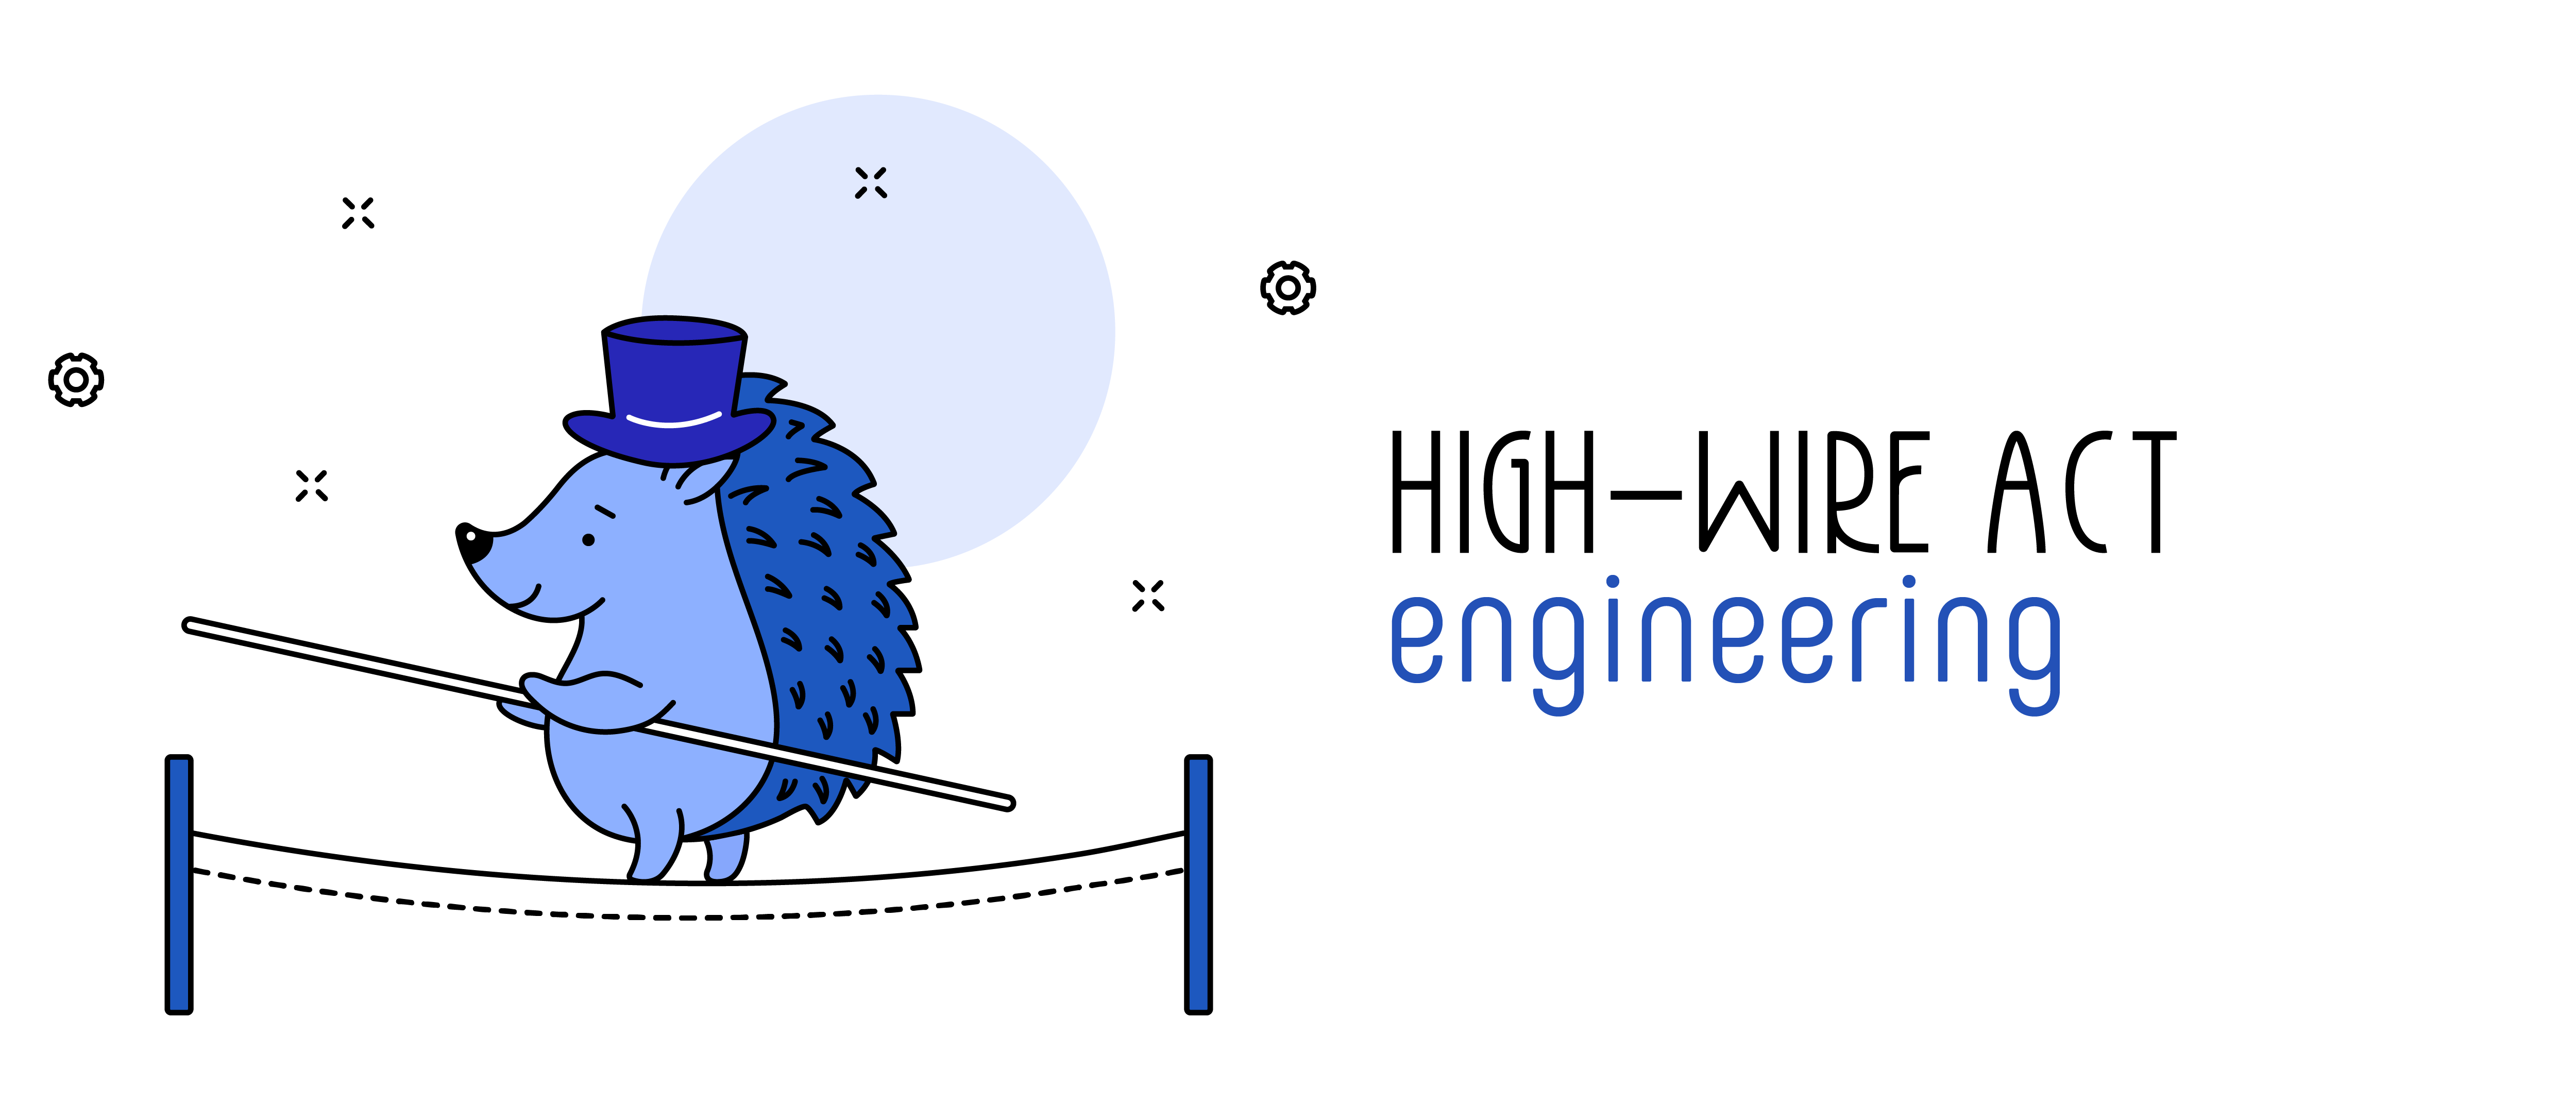 24-25 Engineering - High Wire Act logo of a hedgehog on a hire-wire